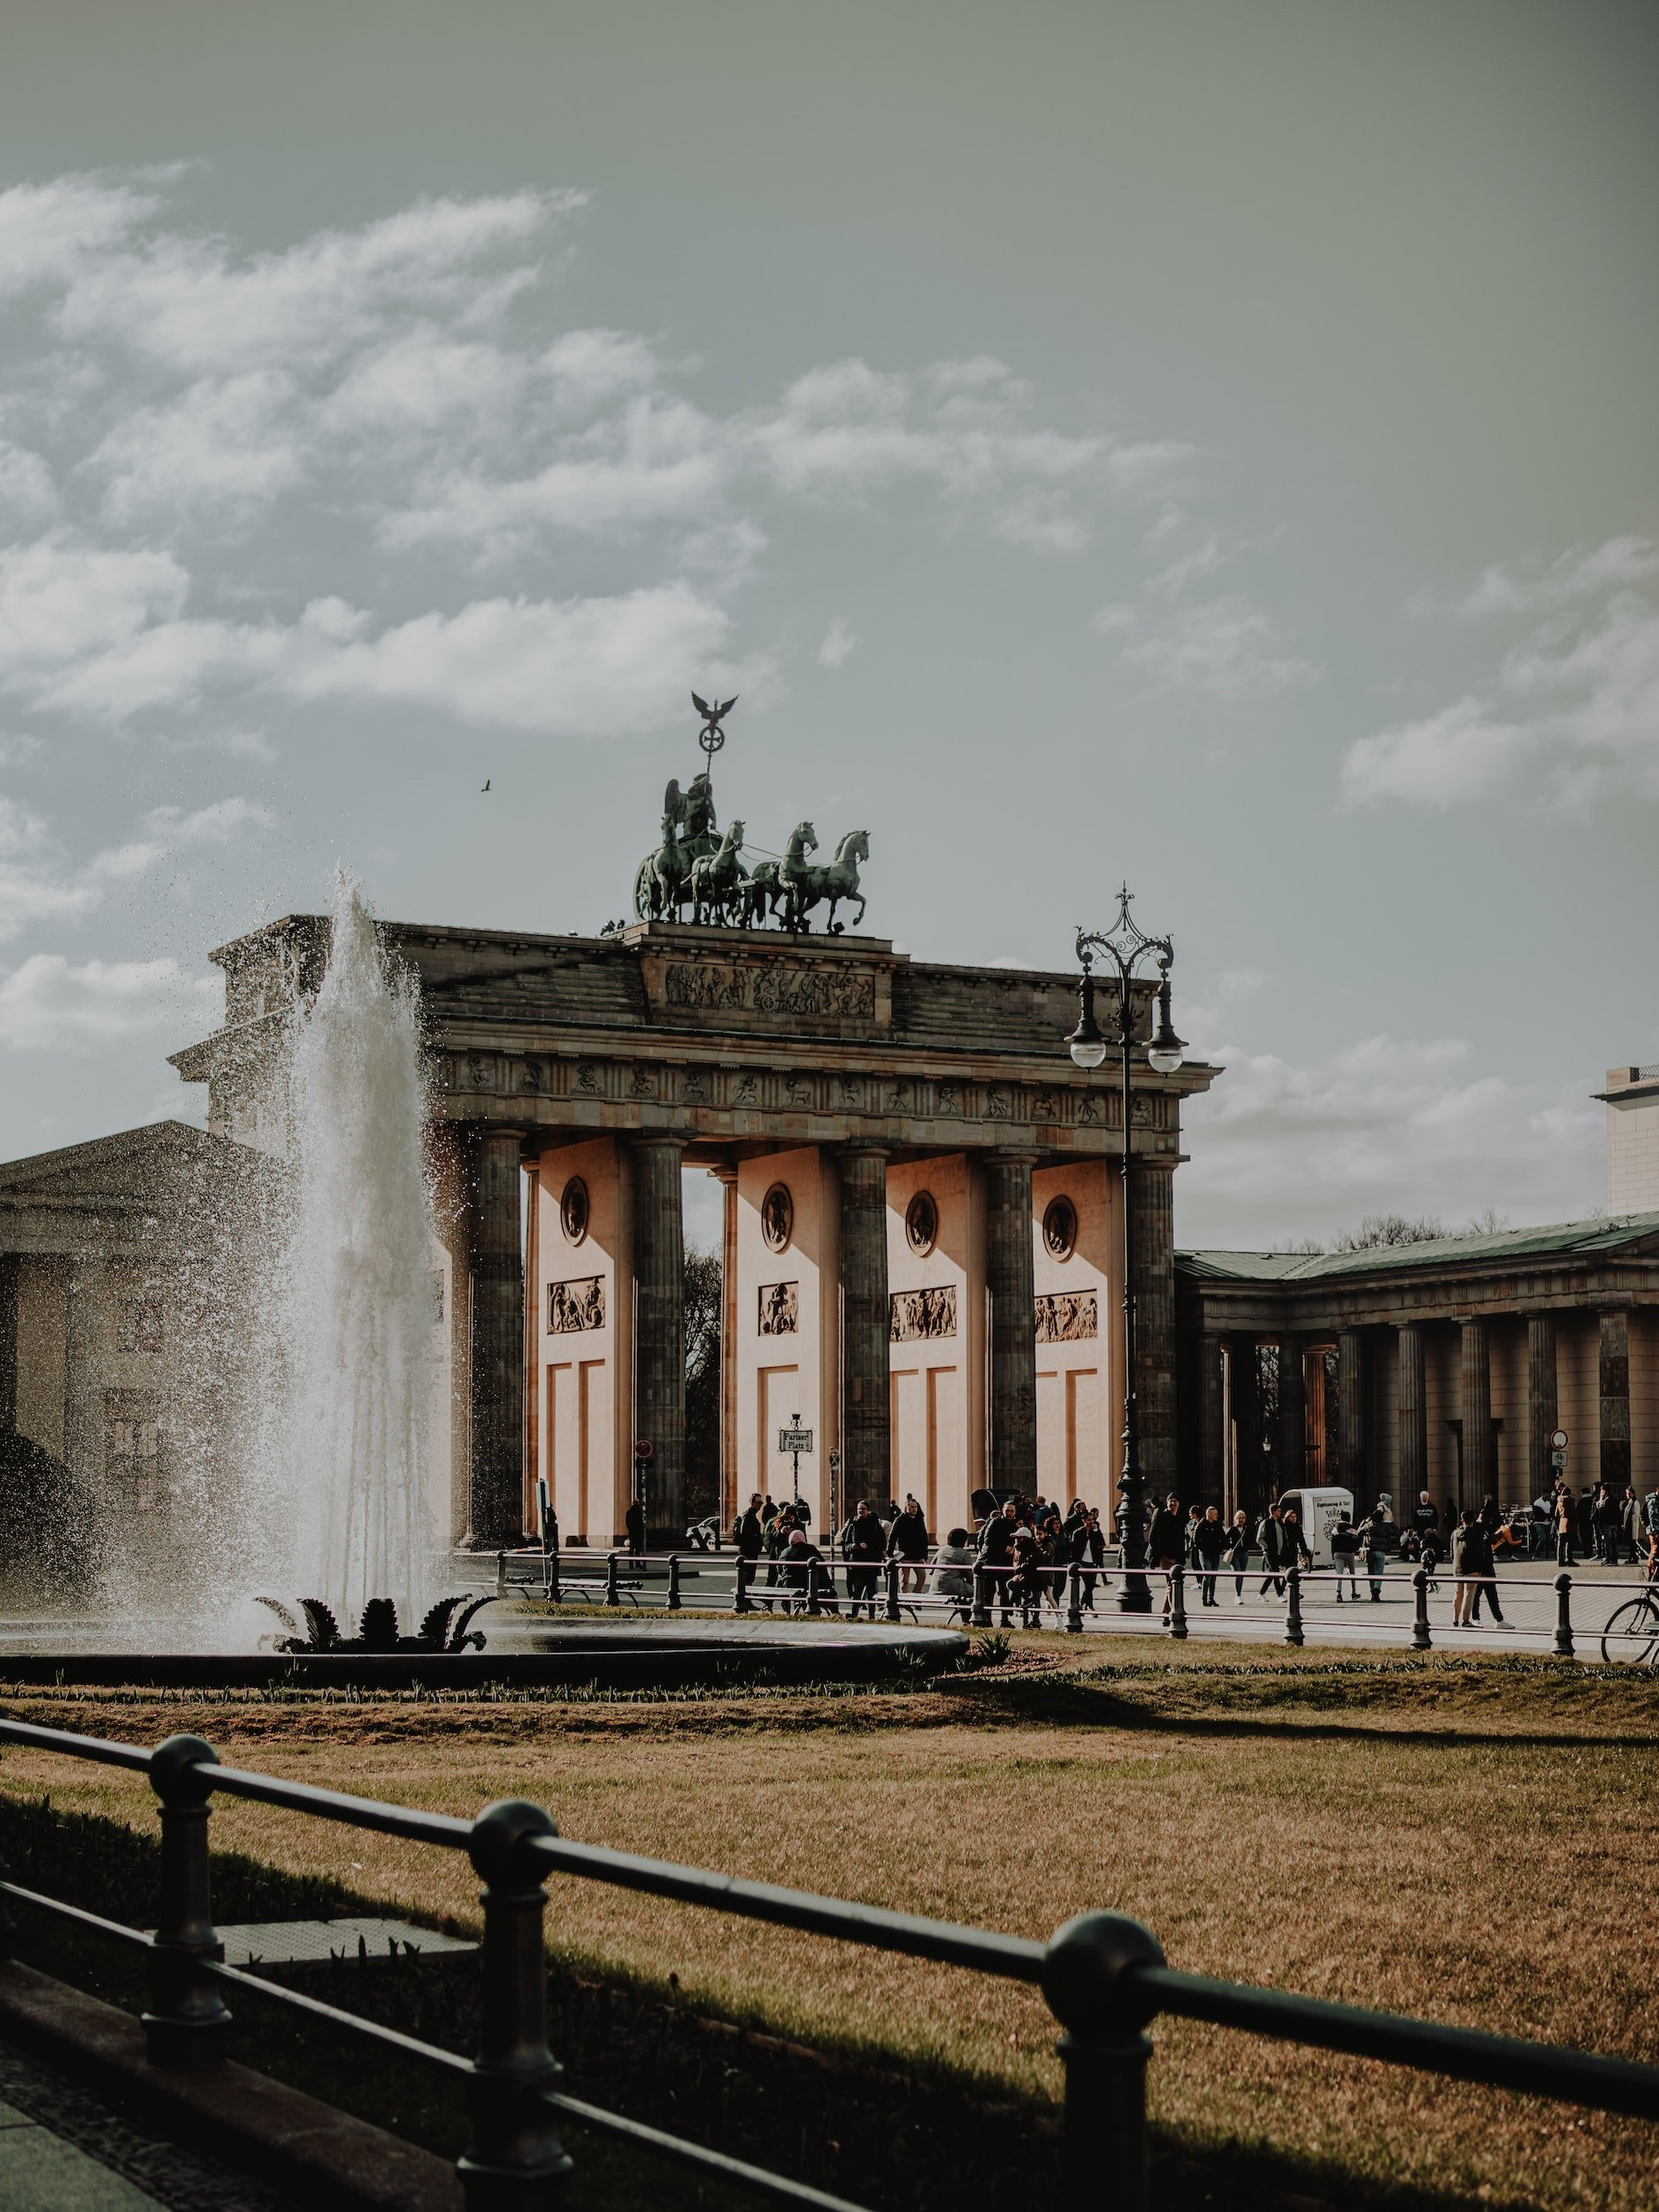 Blinke Krigsfanger Bøde Top 10 Things to See in Berlin, Germany — A Golden Answer